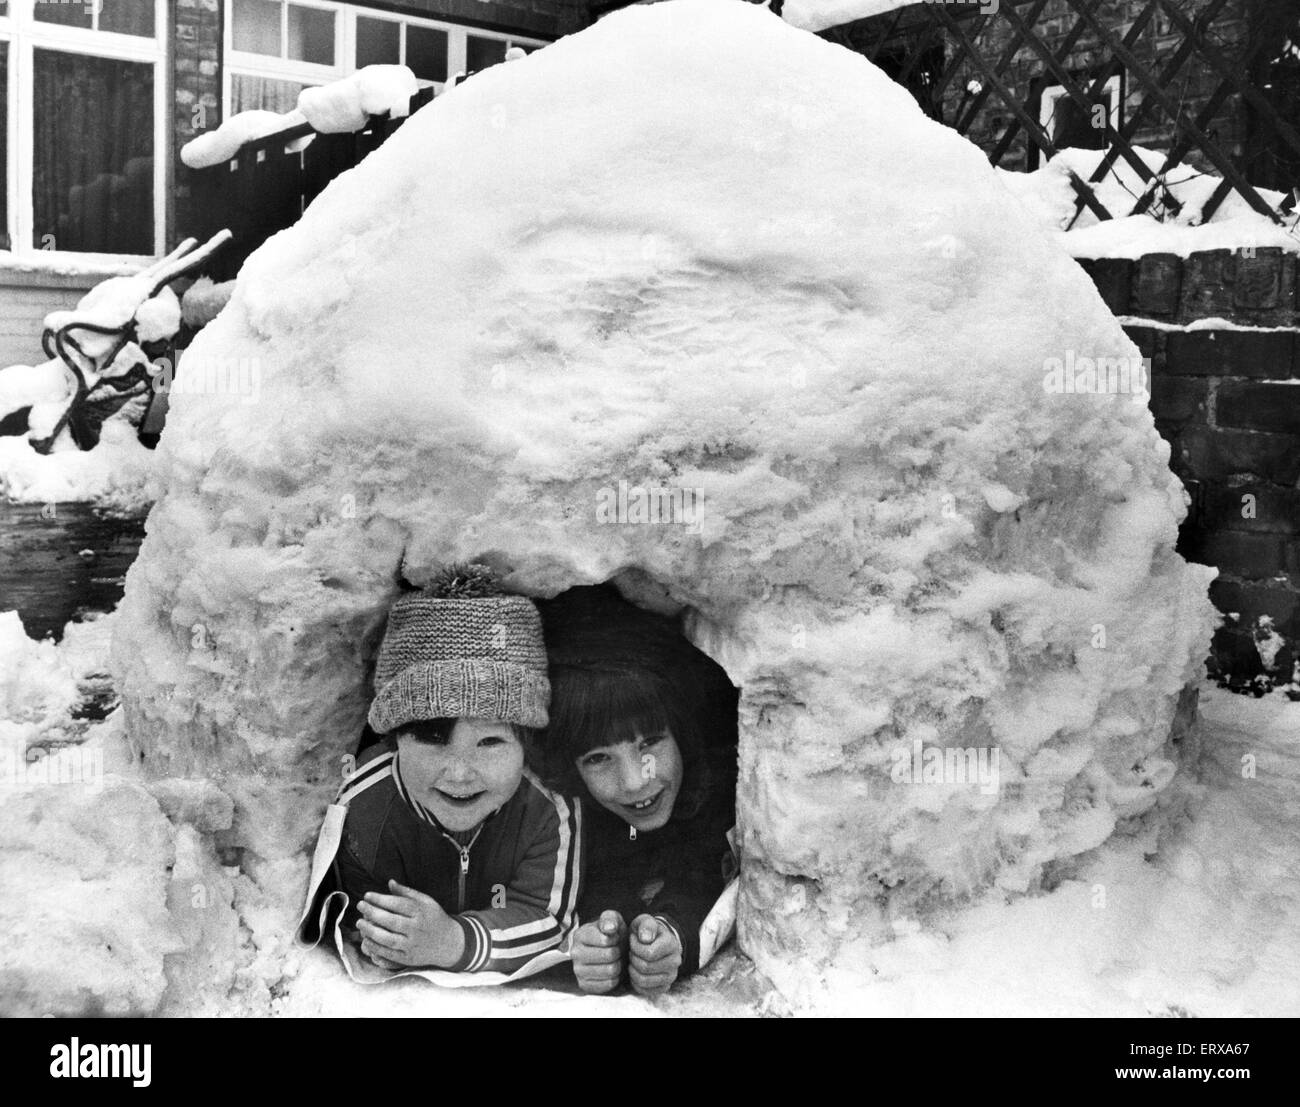 'Little Eskimos', Franz Wheldon  aged 7 and Mark Hogarth  aged 4, built an igloo - with a little help from Franz's dad - in the backyard of Franz's home in Linthorpe, Middlesbrough, North Yorkshire. 13th February 1978. Stock Photo